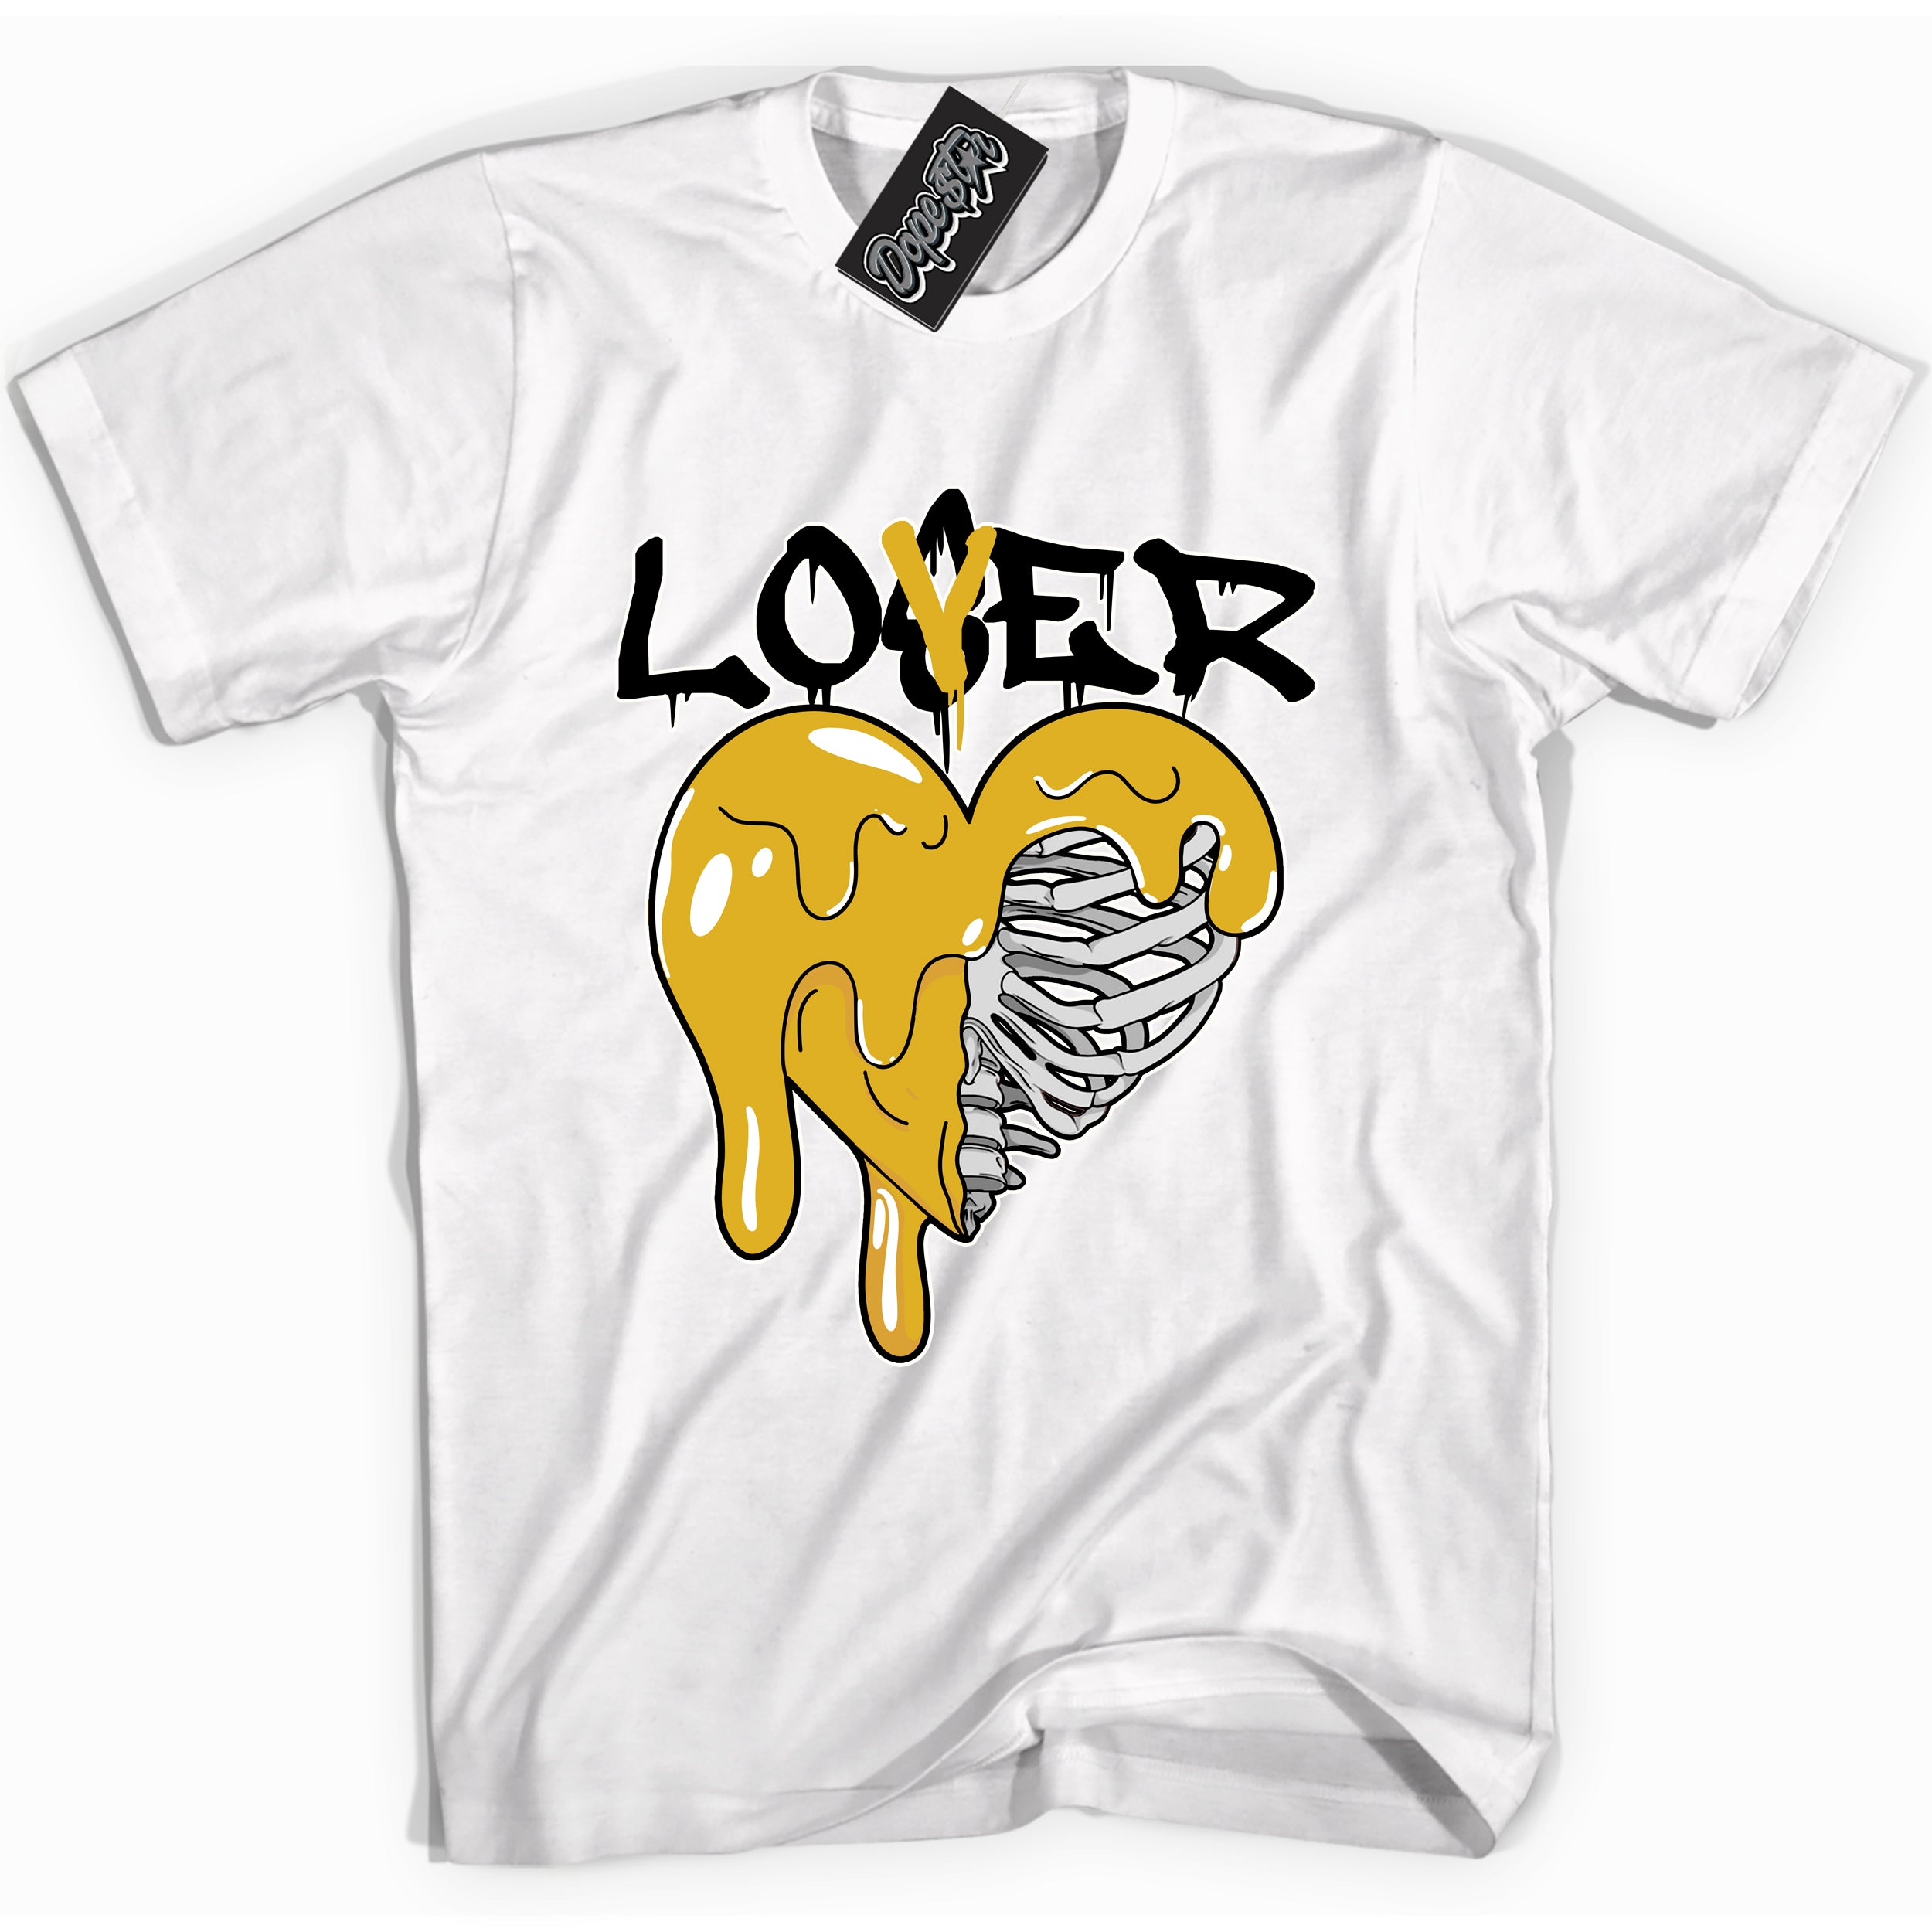 Cool White Shirt With Lover Loser design That Perfectly Matches AIR JORDAN 6 RETRO YELLOW OCHRE Sneakers.